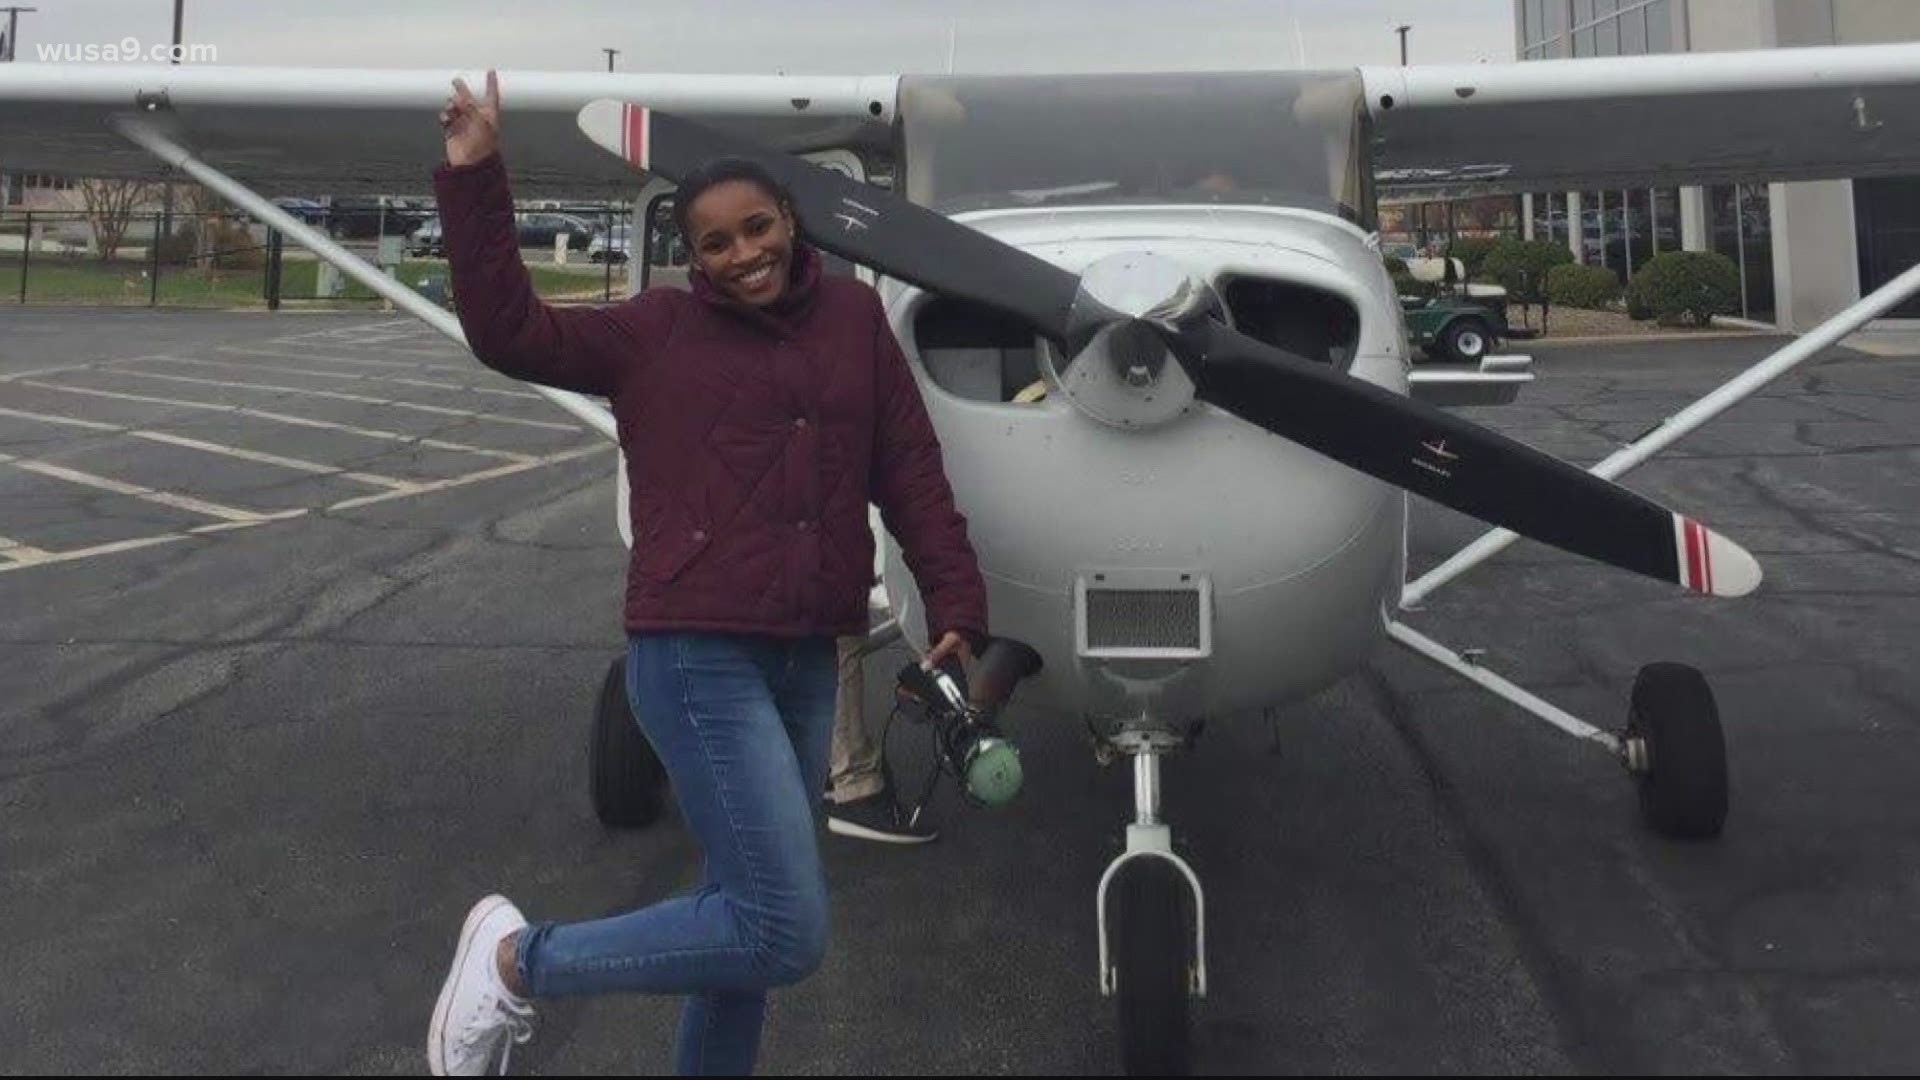 Arlington senior Nilah Williamson has a slightly different goal than other teens -- get her pilot's license before she graduates.